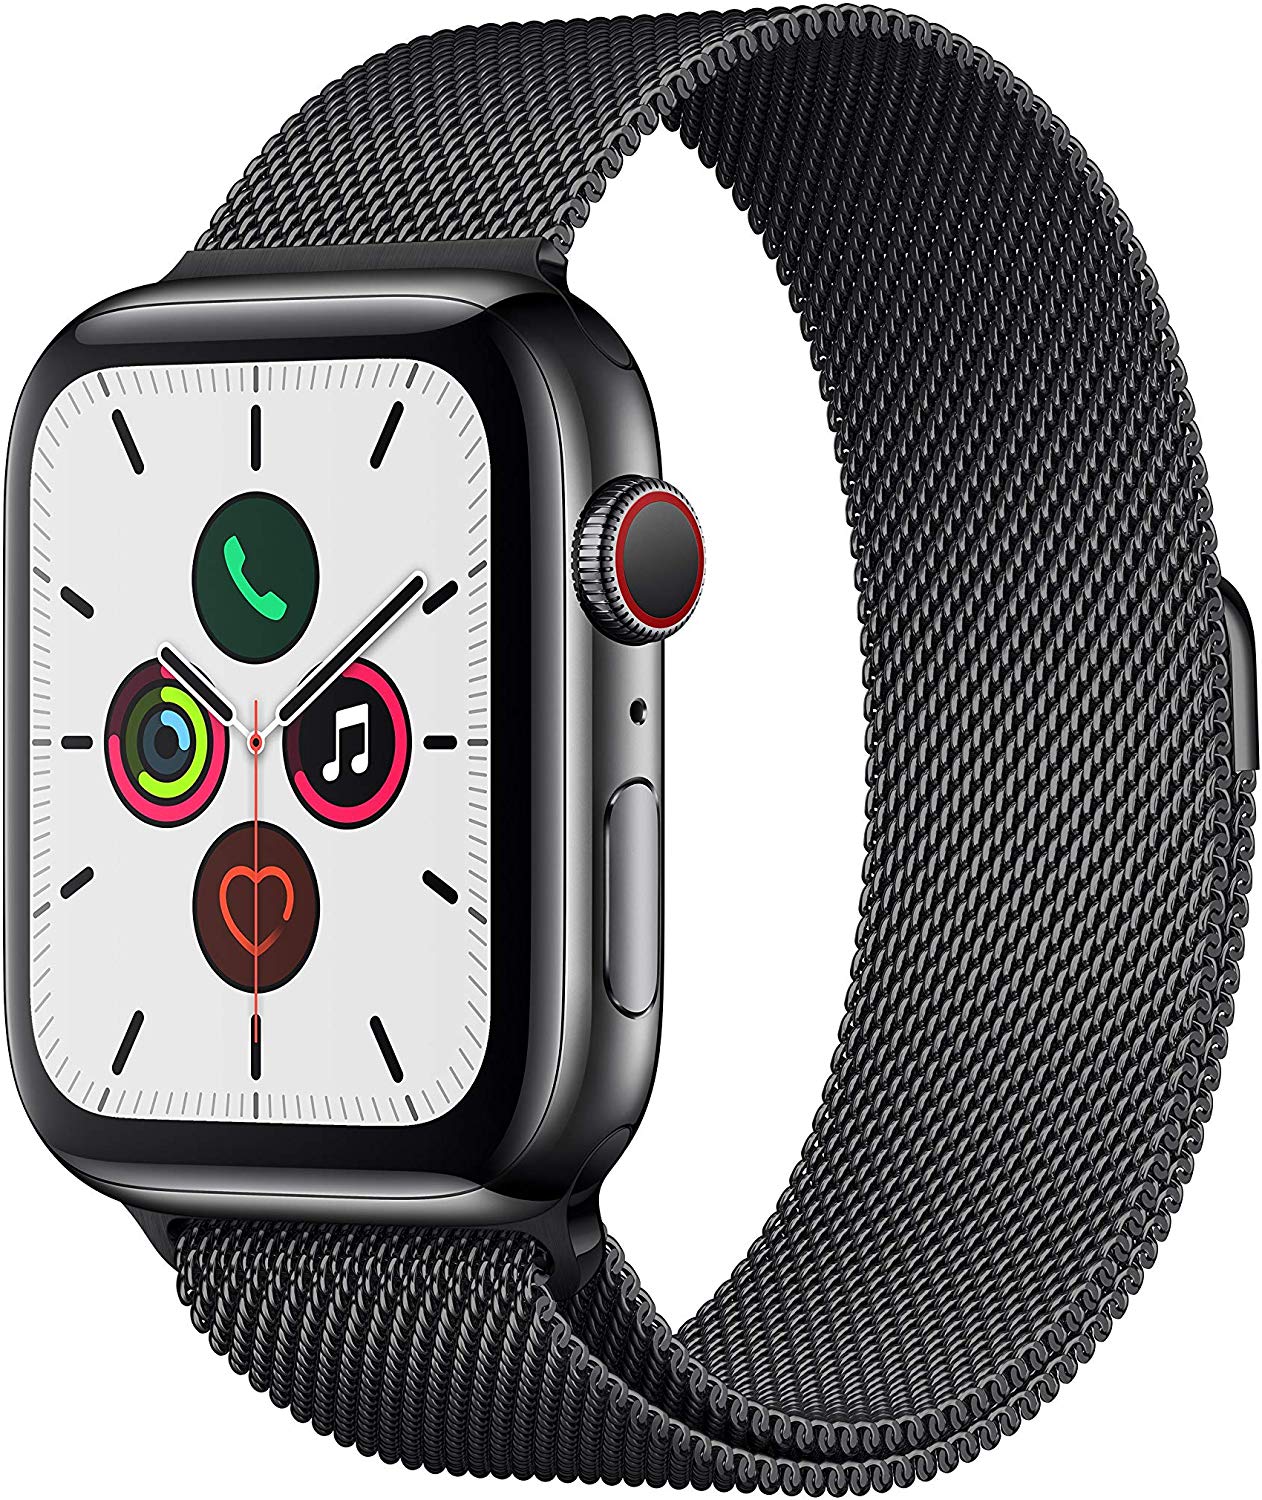 Apple Watch Series 5 (2019) 44mm GPS + Cellular -  Black Stainless Case &amp; Black Milanese Loop Band (New)